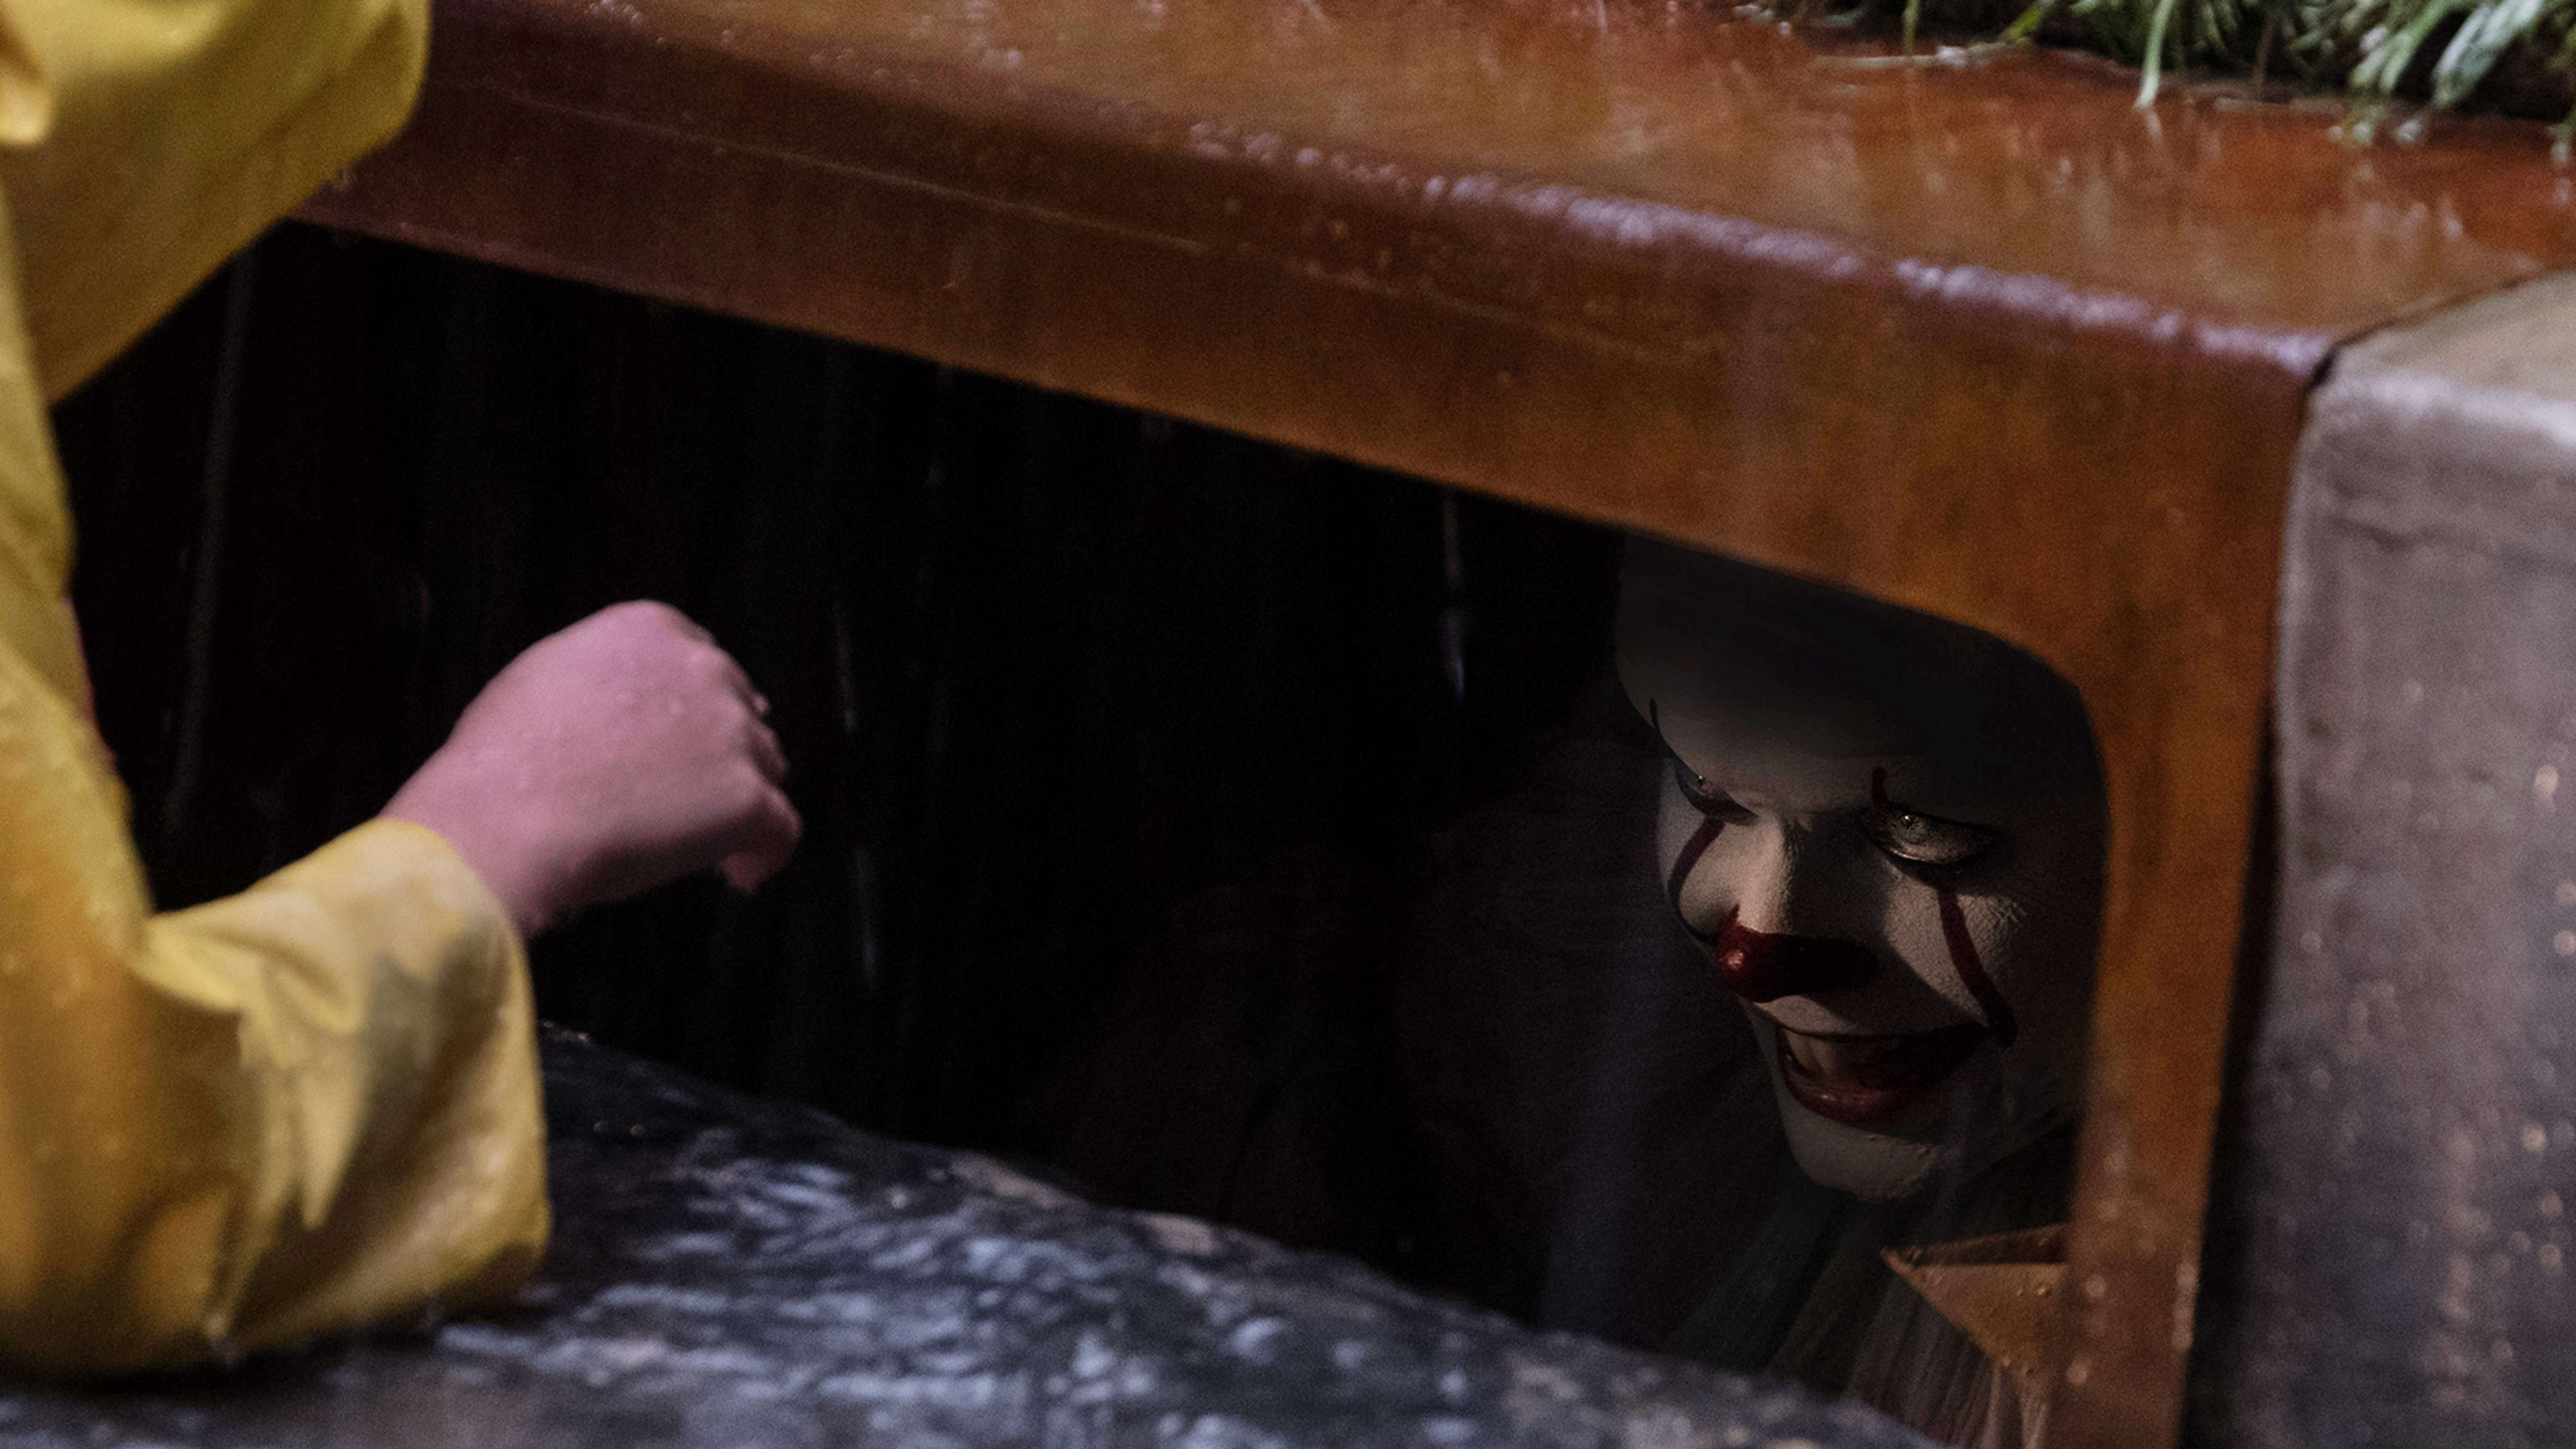 We Need To Talk About The Opening Scene Of “It”